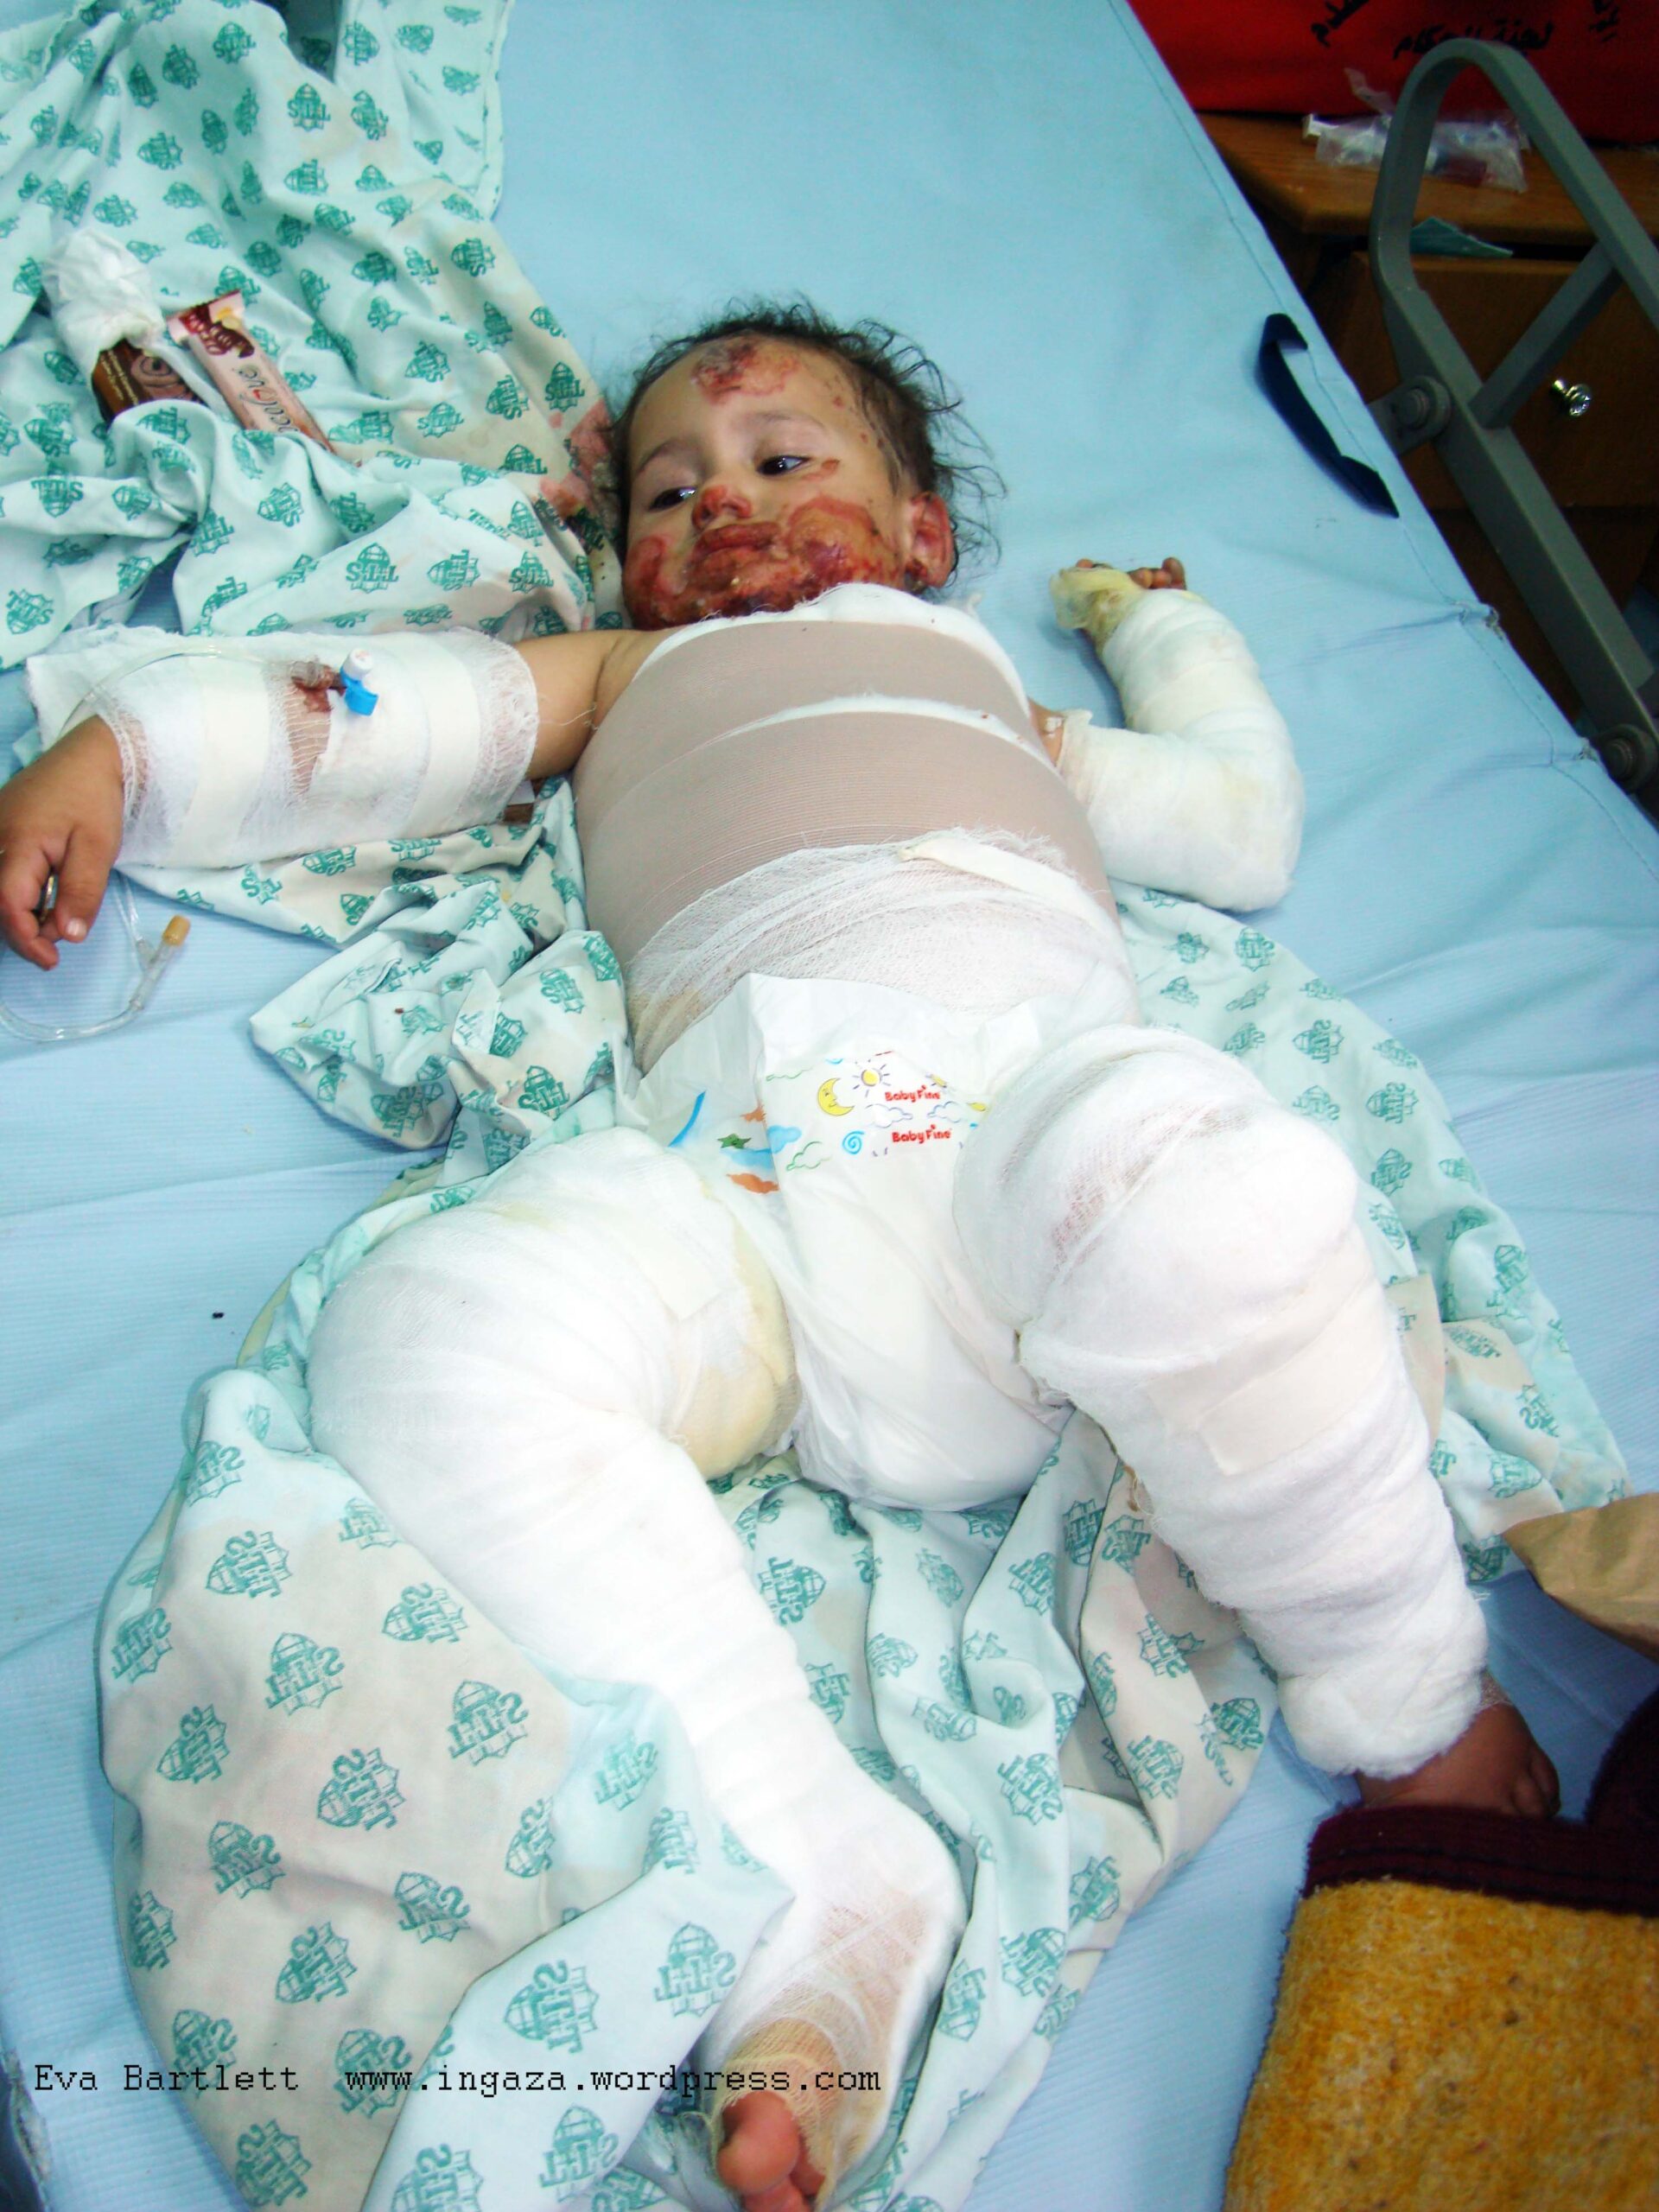 Six members of Farah's family were killed by Israeli-fired white phosphorous in January 2009. The 3 year old sustained white phosphorous burns over 22% of her body area.